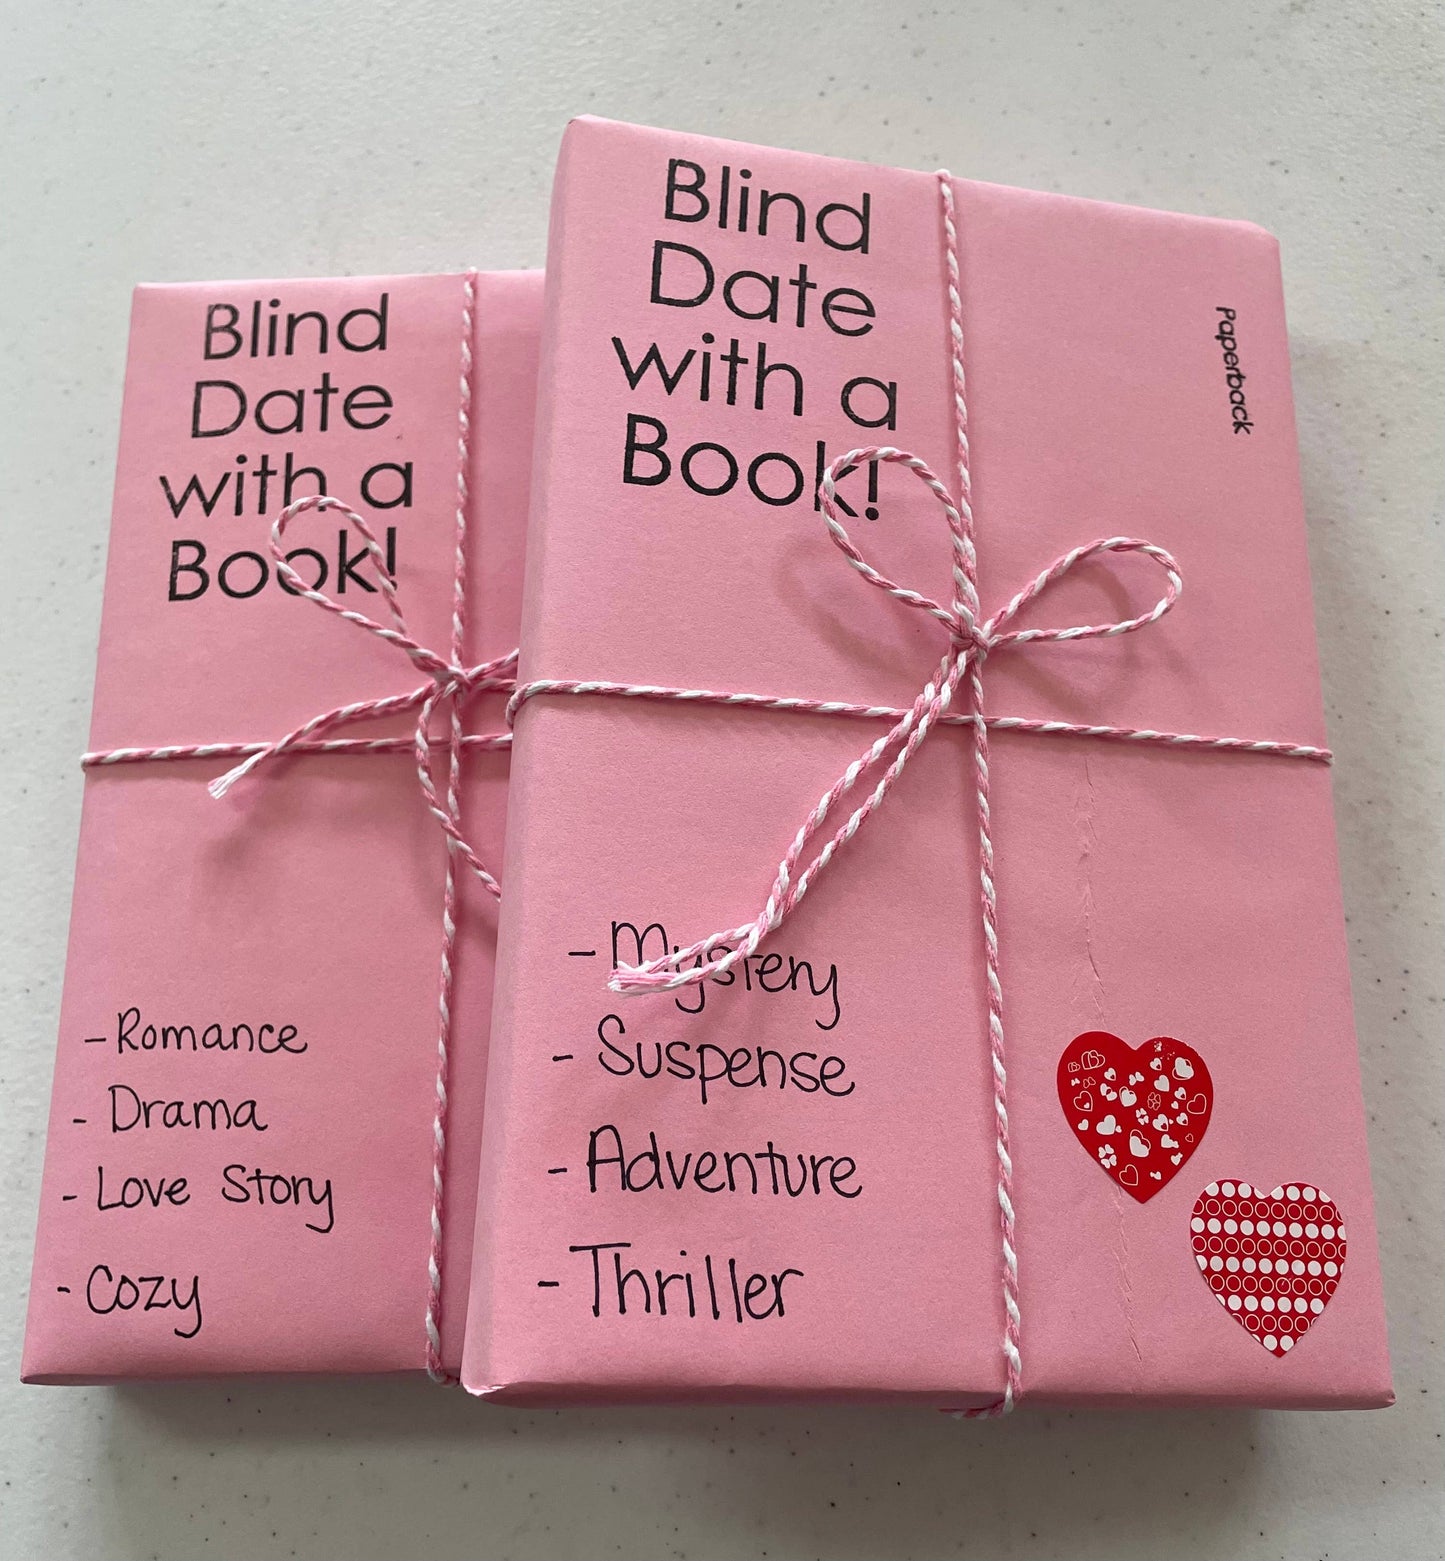 Blind Date With a Book - Valentines Day Edition